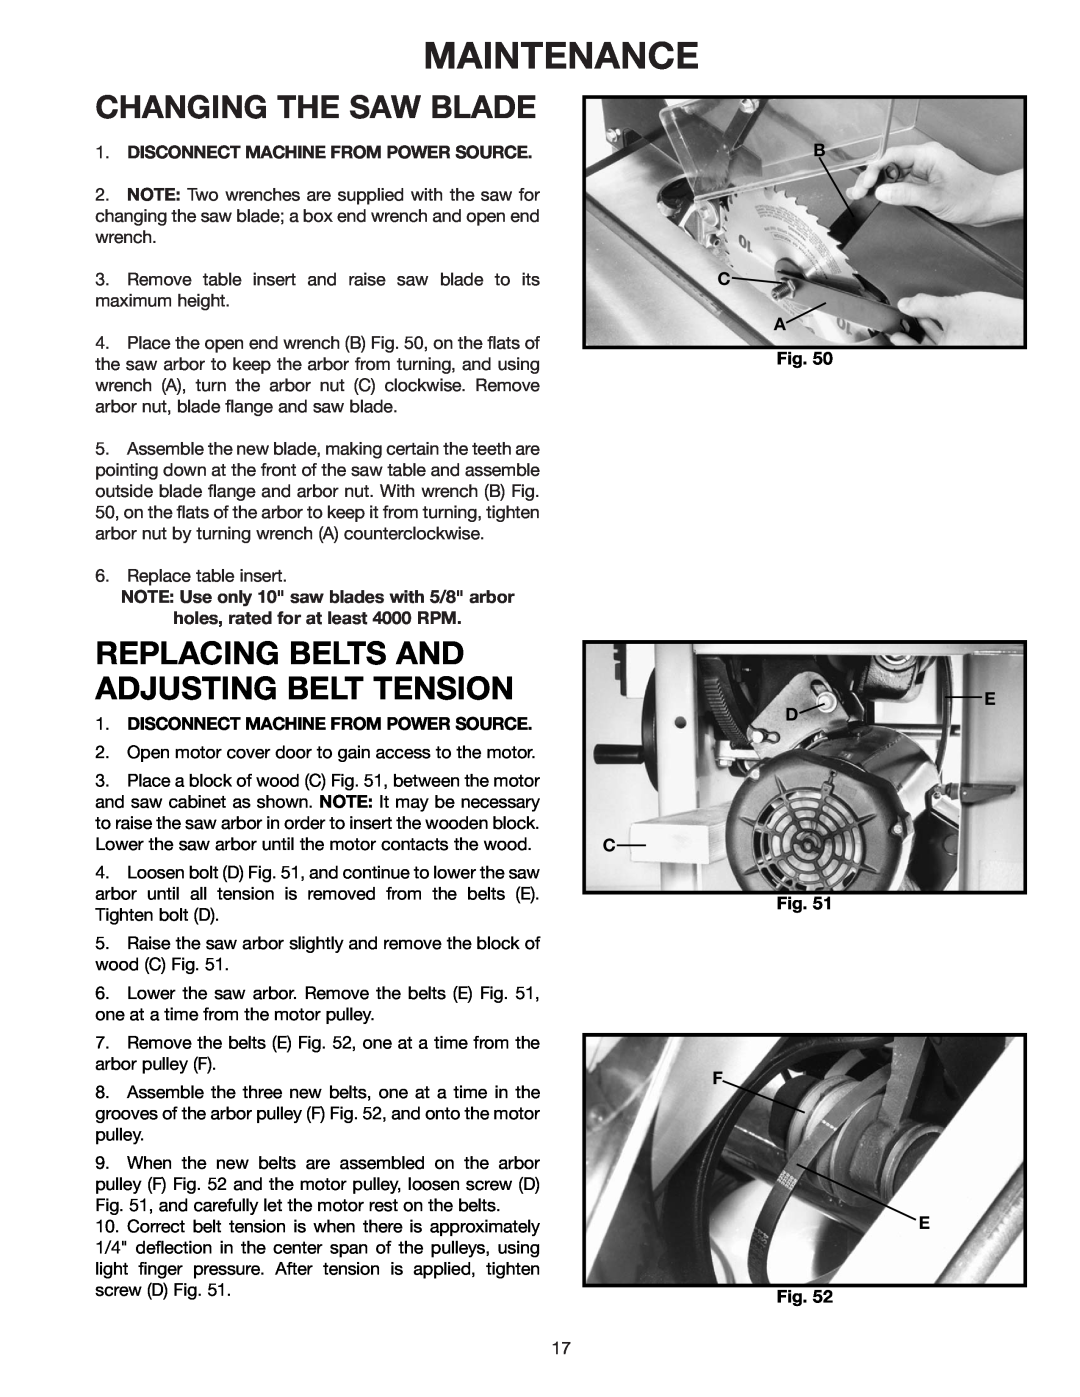 Delta 34-814 Maintenance, Changing The Saw Blade, Replacing Belts And Adjusting Belt Tension, B C A Fig, Fig. F E Fig 